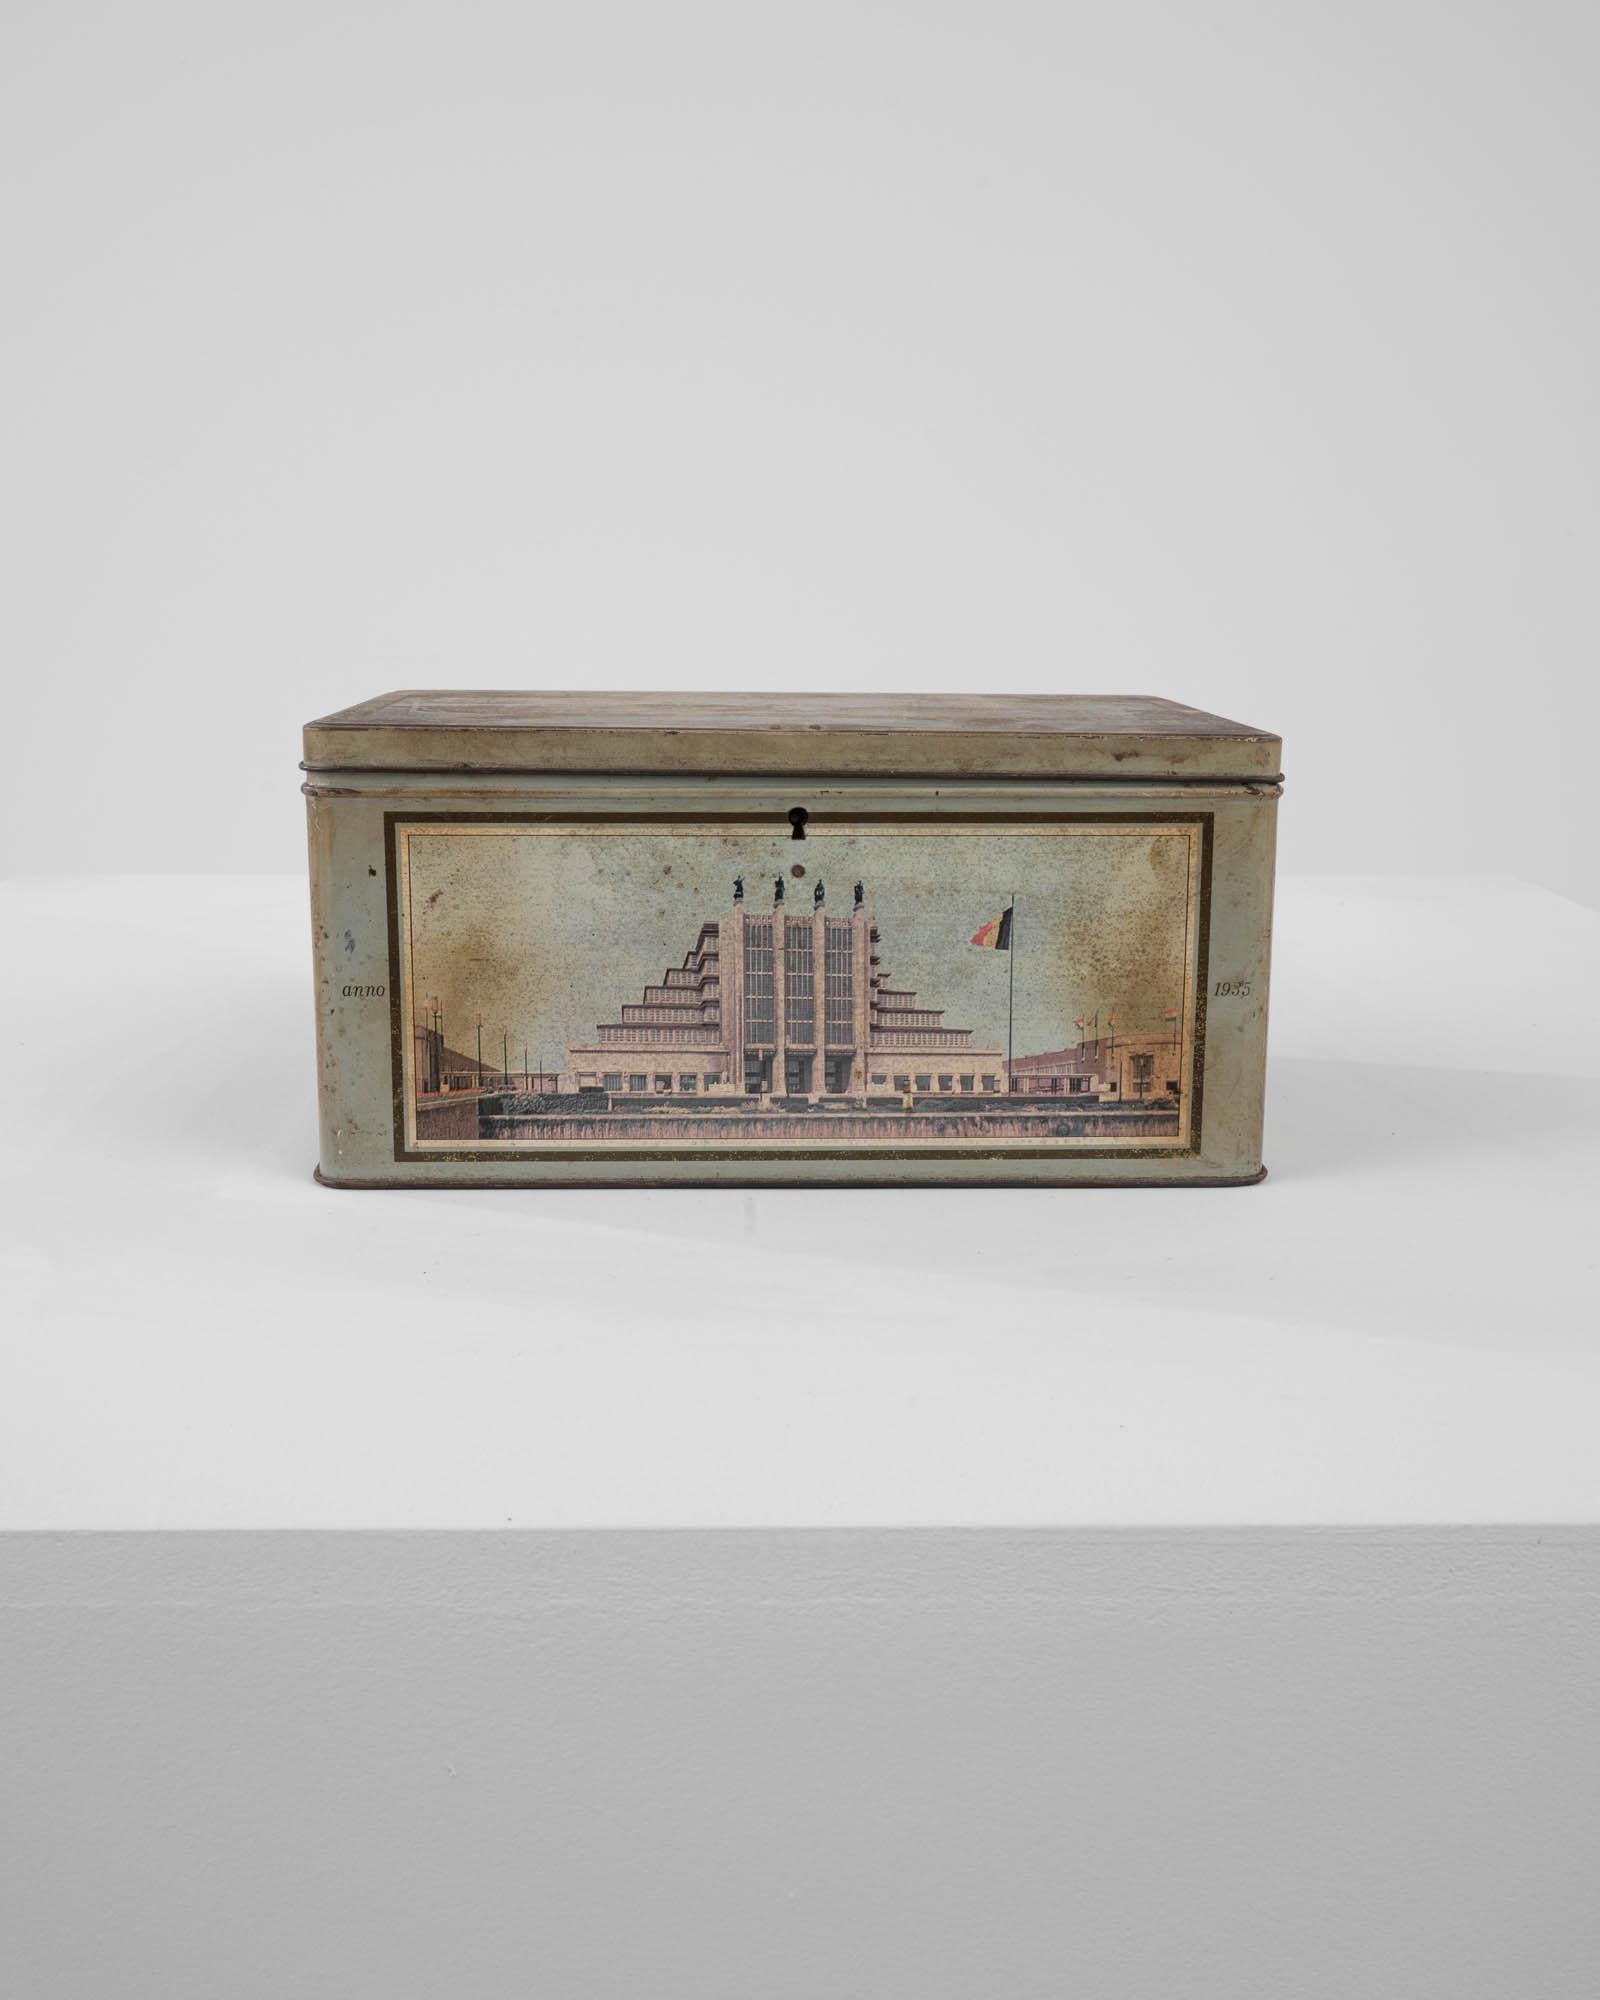 Produced in France in the 20th Century as an ode to World’s Fairs of the past. The front of the box depicts the iconic art deco structure ‘Grand Palais’ which was the main feature of the 1935 Brussels exhibition. Although forgotten in the world’s